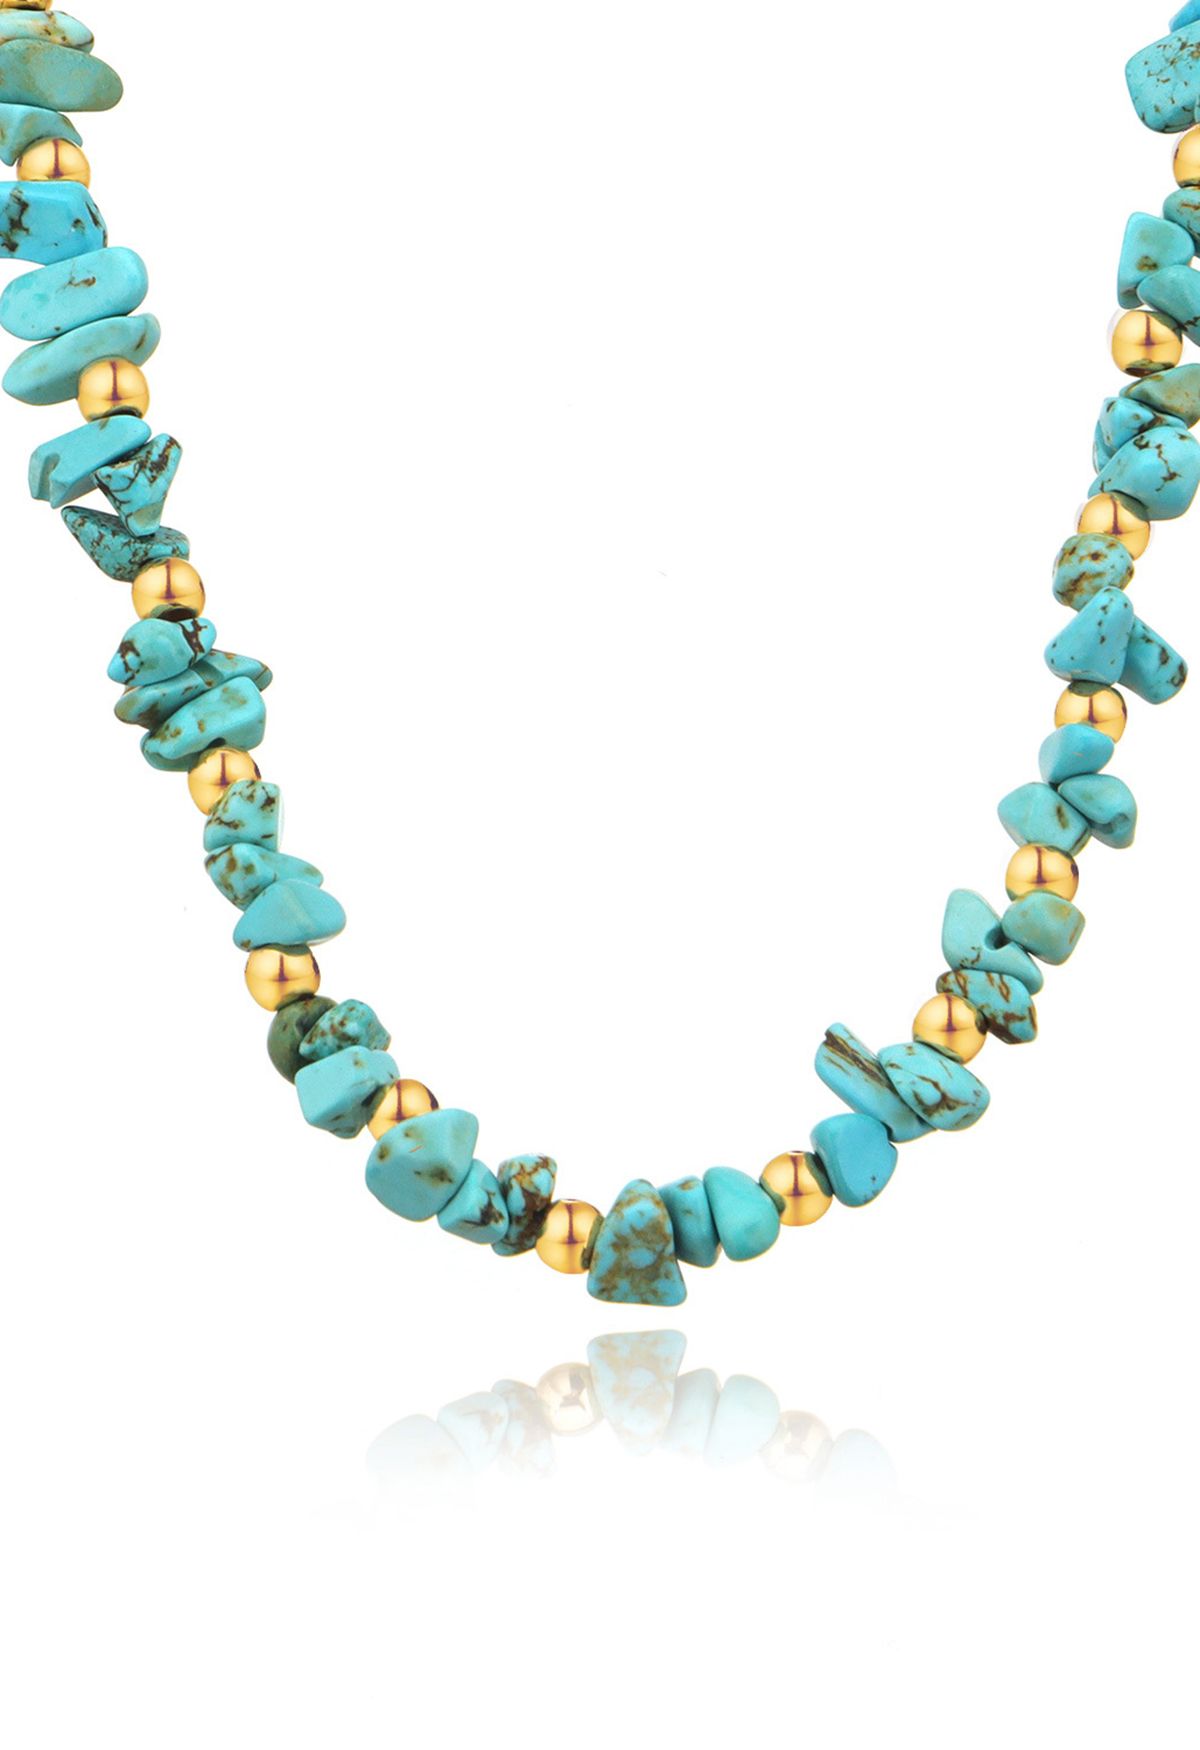 Irregular Natural Stone Necklace in Turquoise